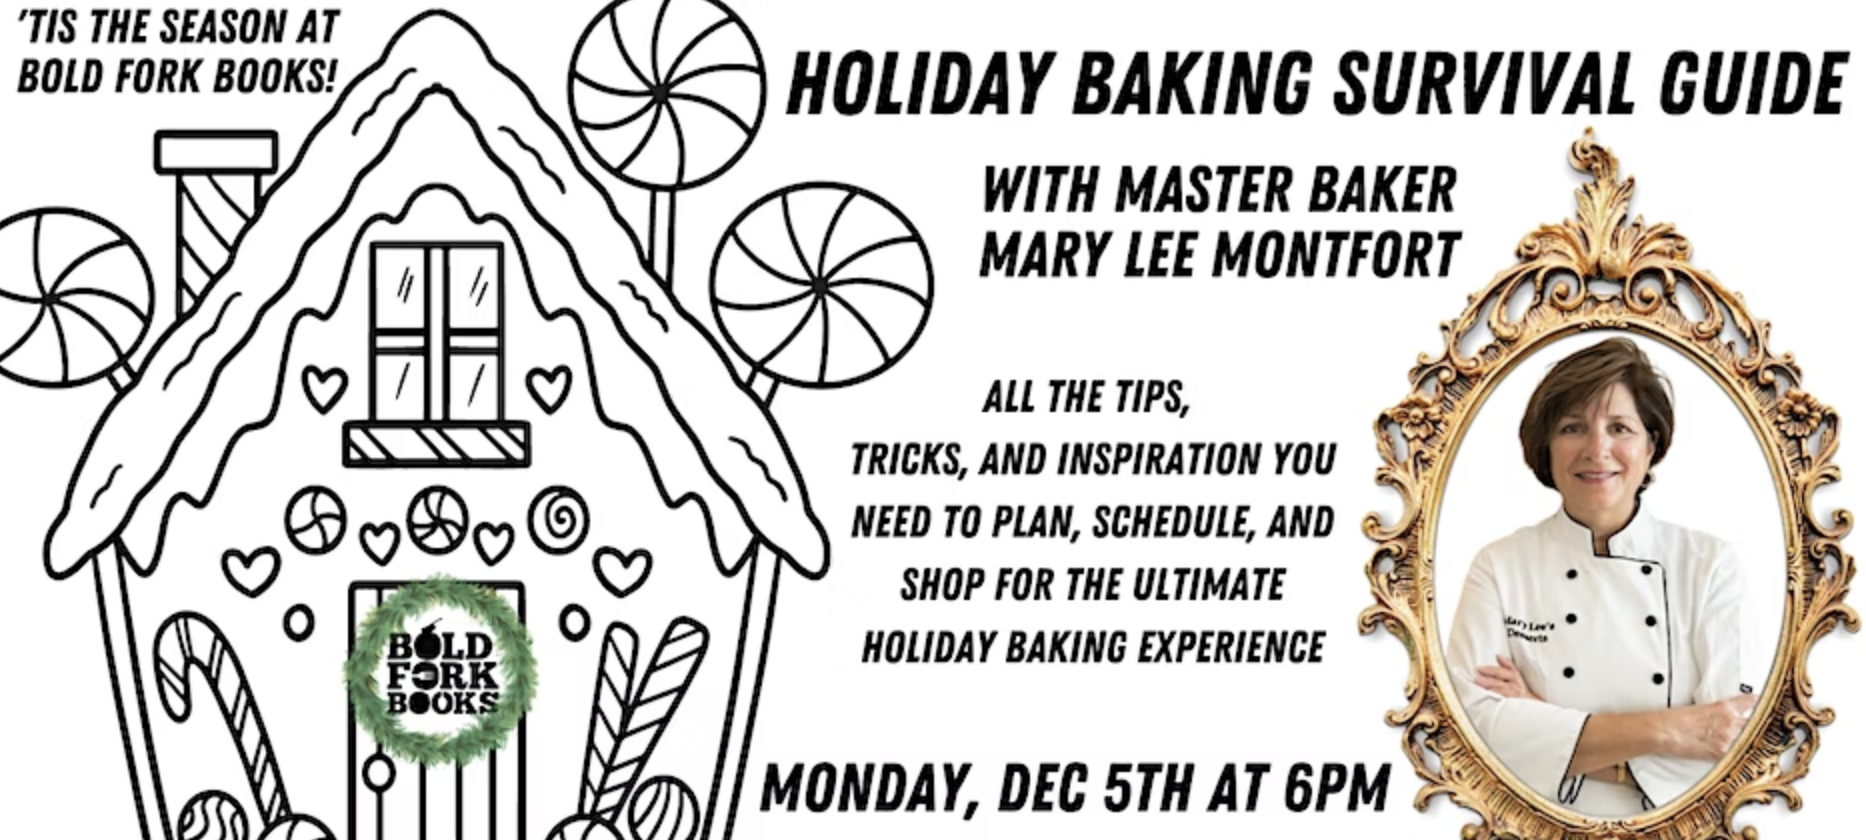 Holiday Baking Survival Guide with Mary Lee Montfort